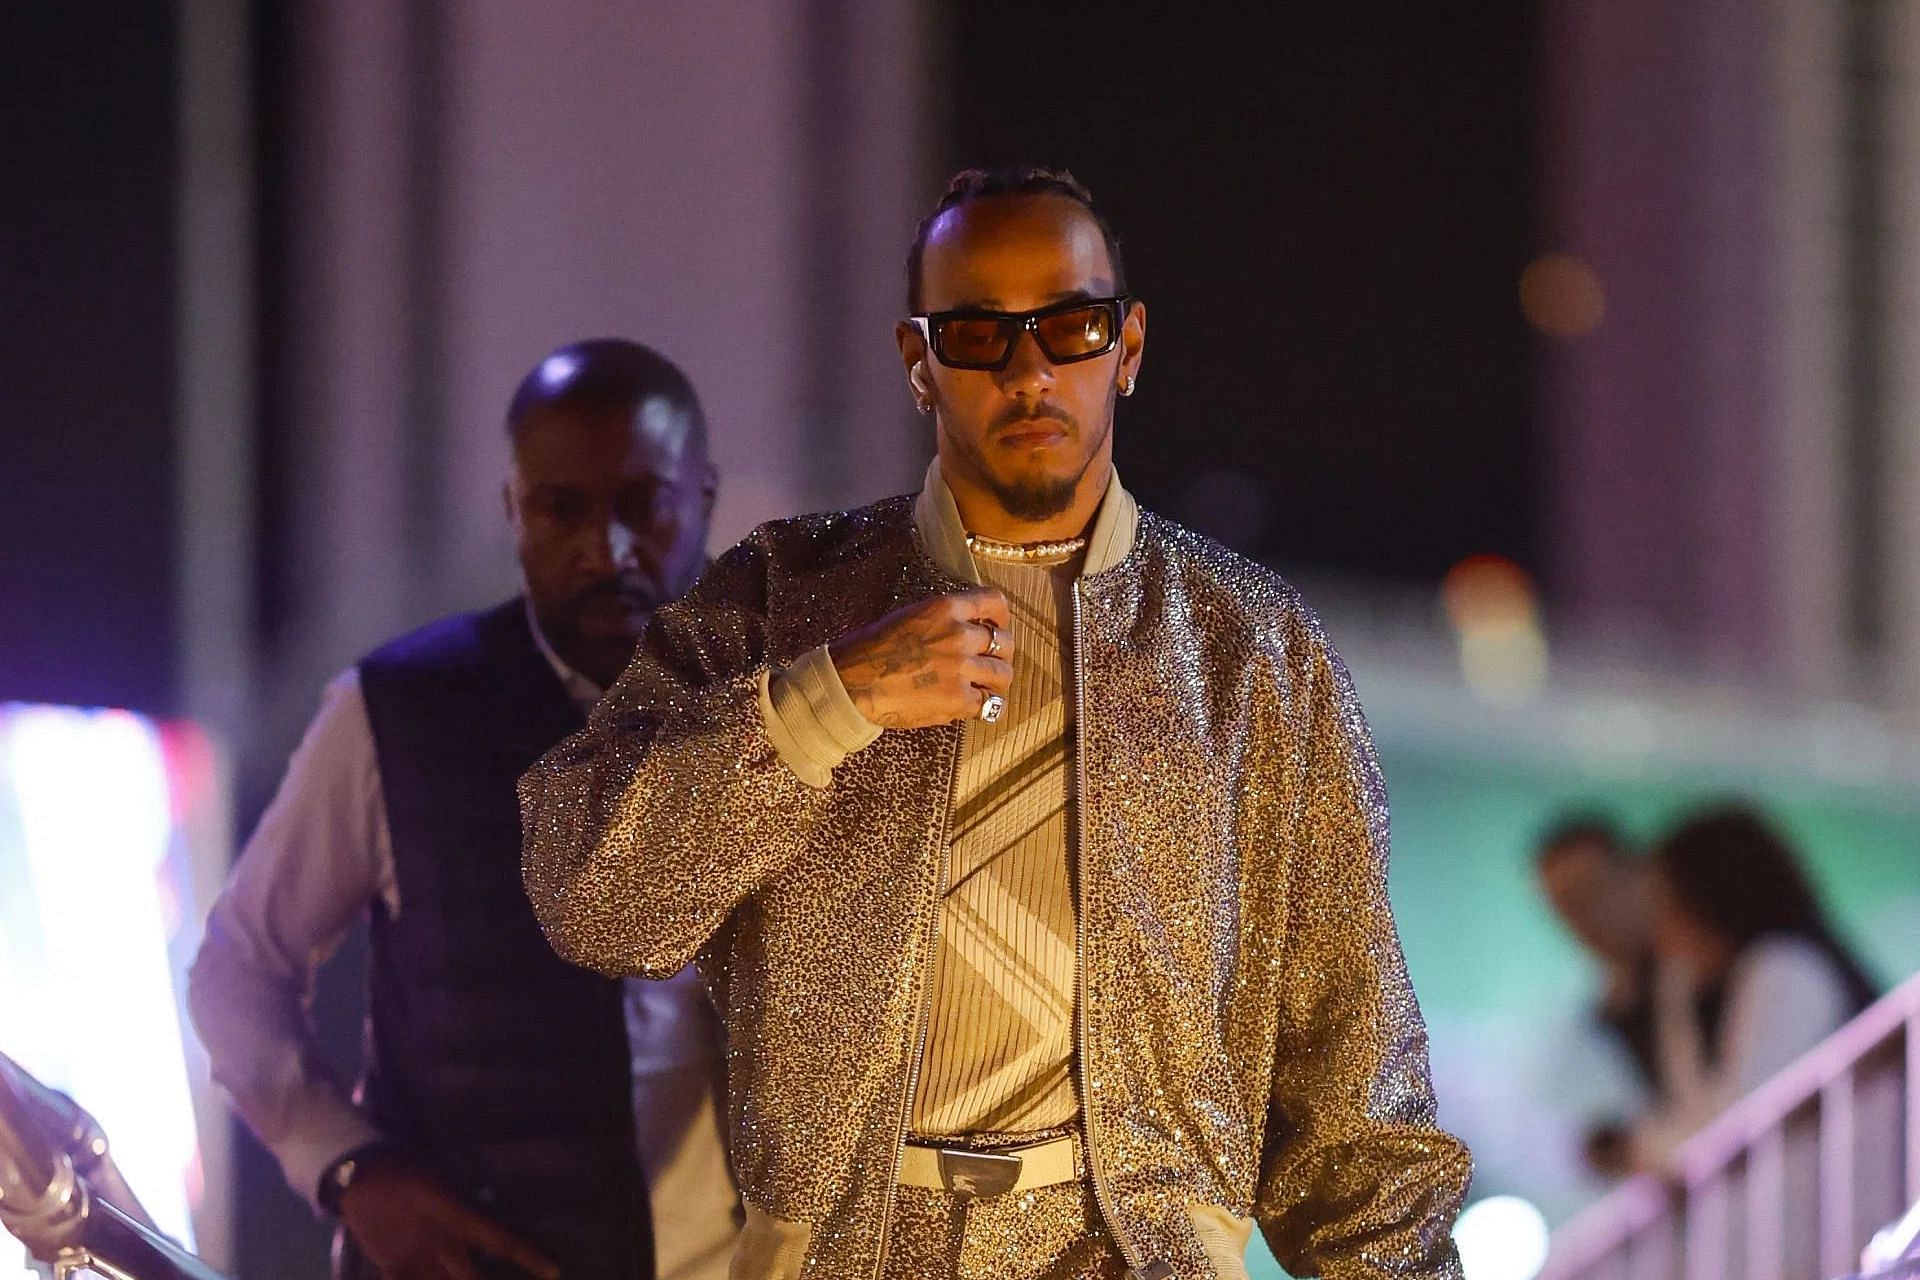 Lewis Hamilton walks in the paddock prior to the 2023 F1 Las Vegas Grand Prix. (Photo by Chris Graythen/Getty Images)